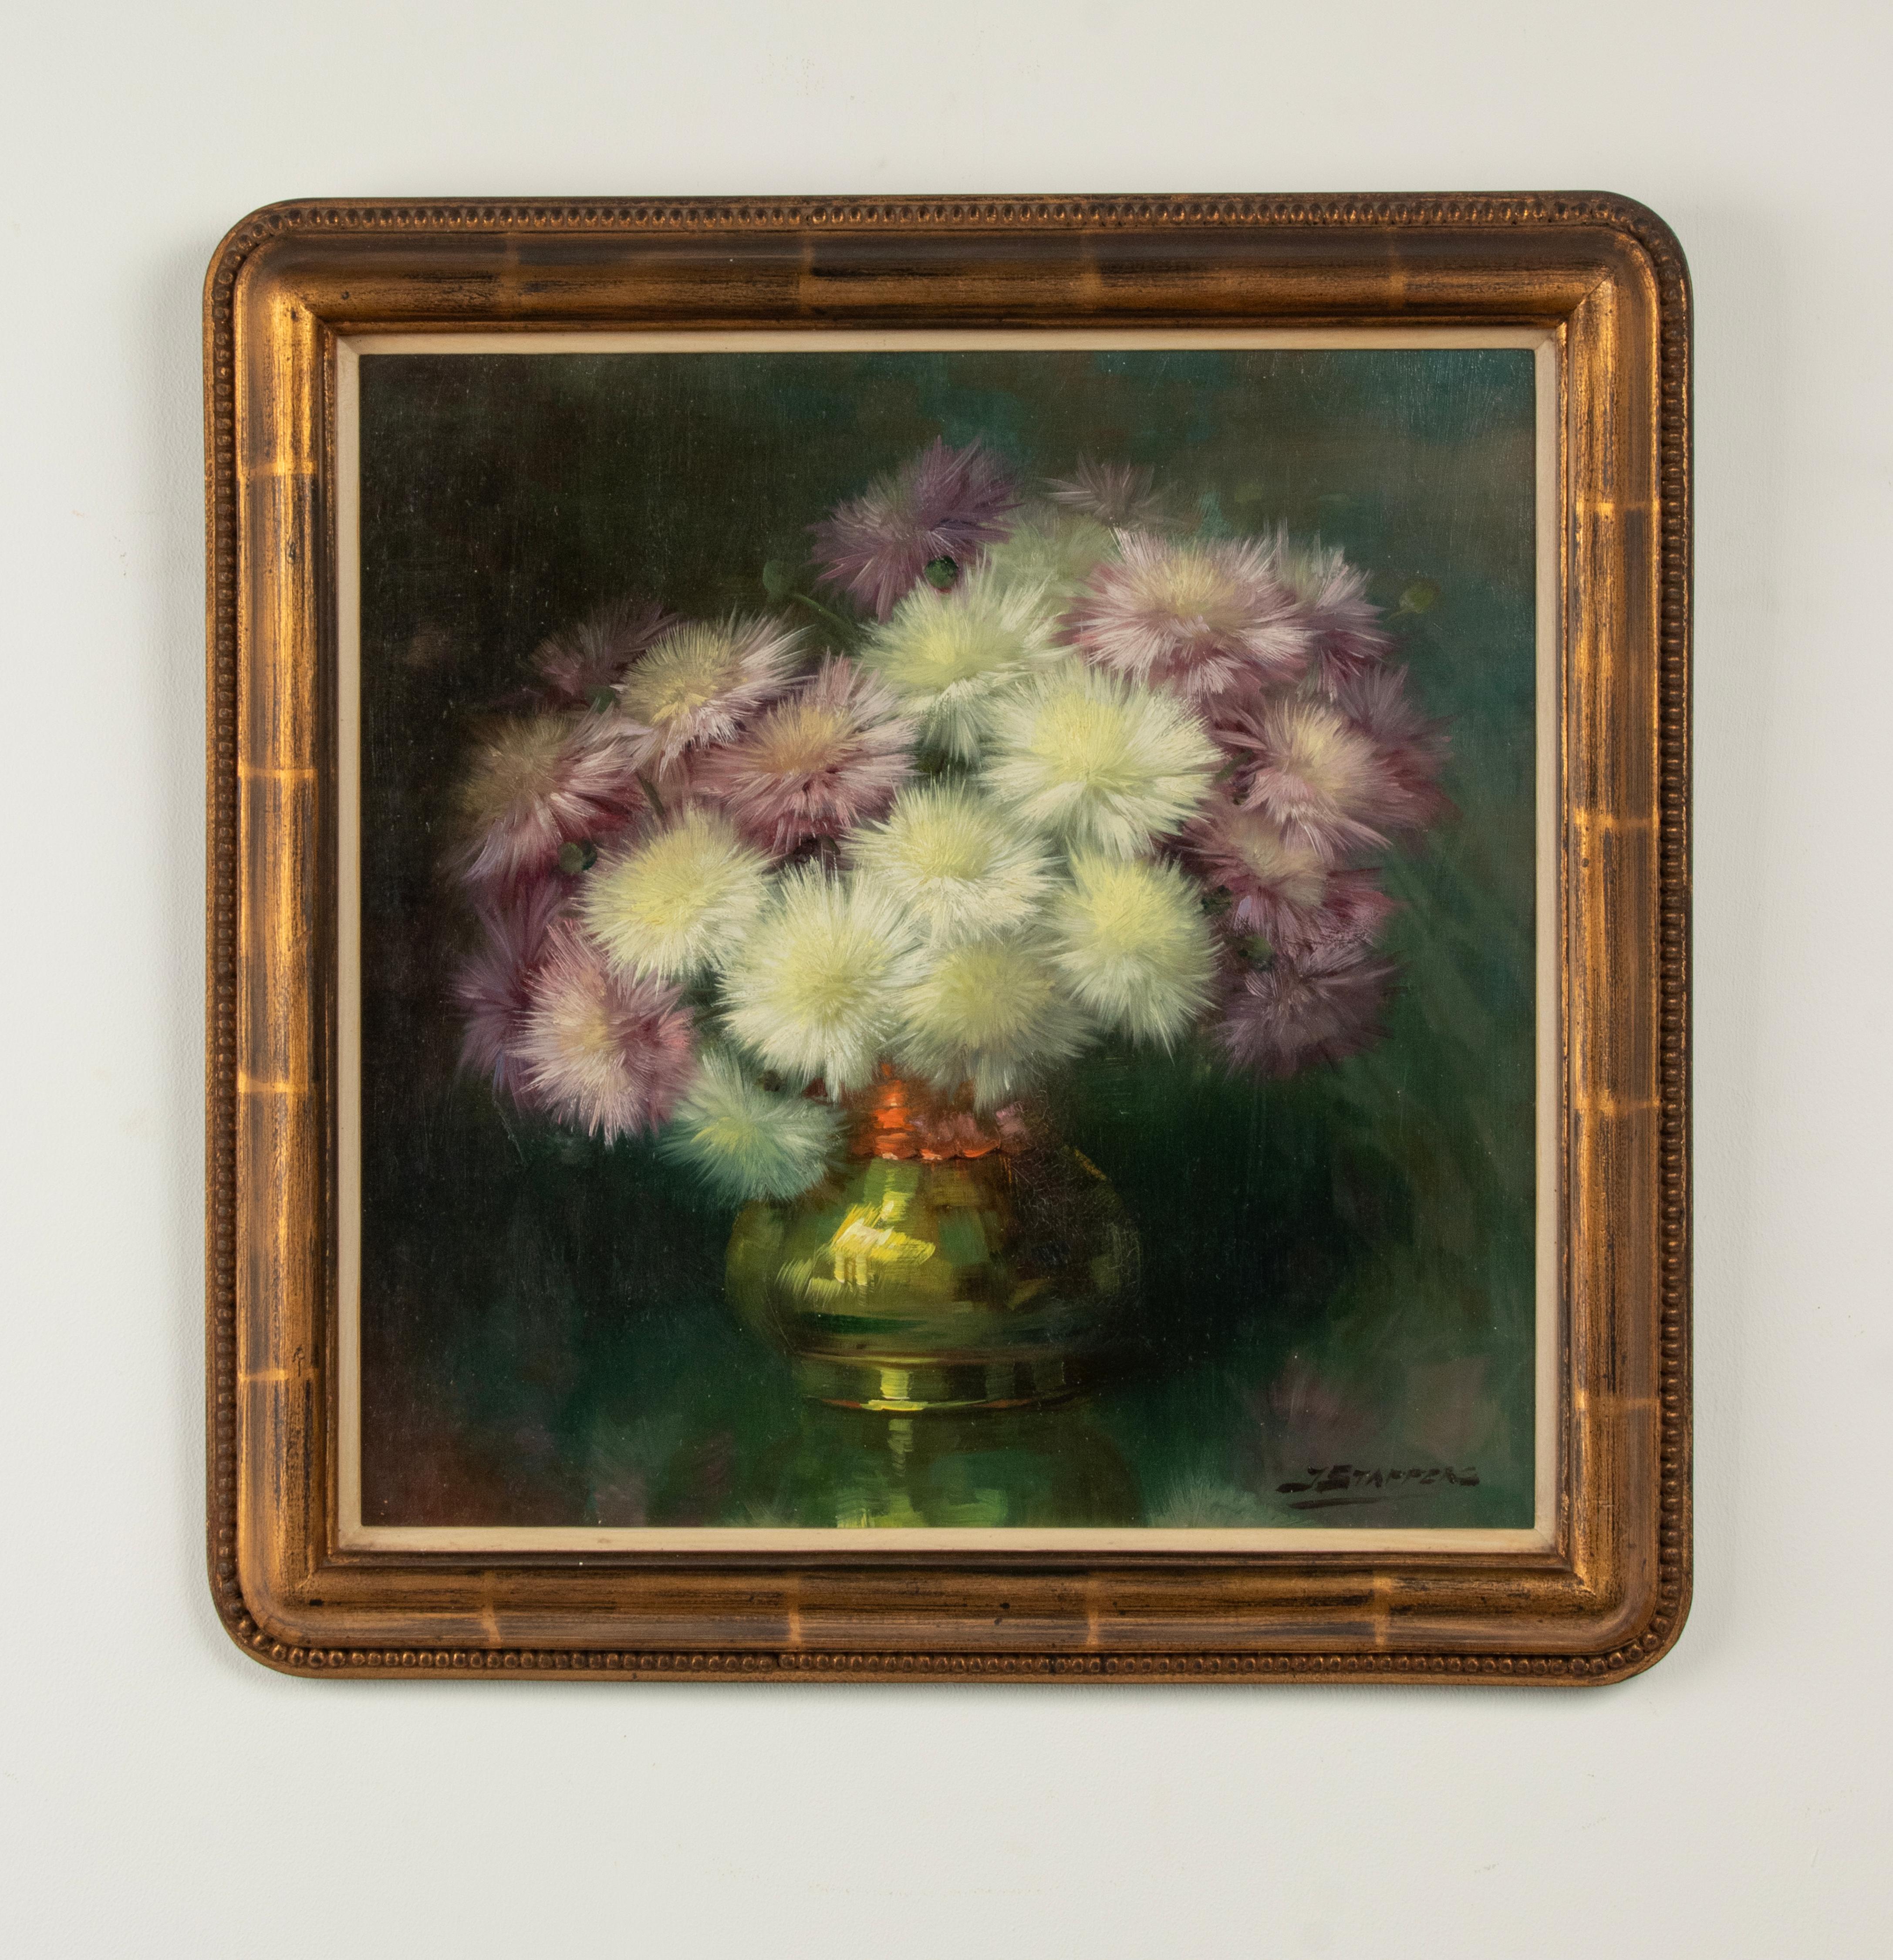 Art Deco Early 20th Century Oil Painting Flower Still Life by Julien Stappers For Sale